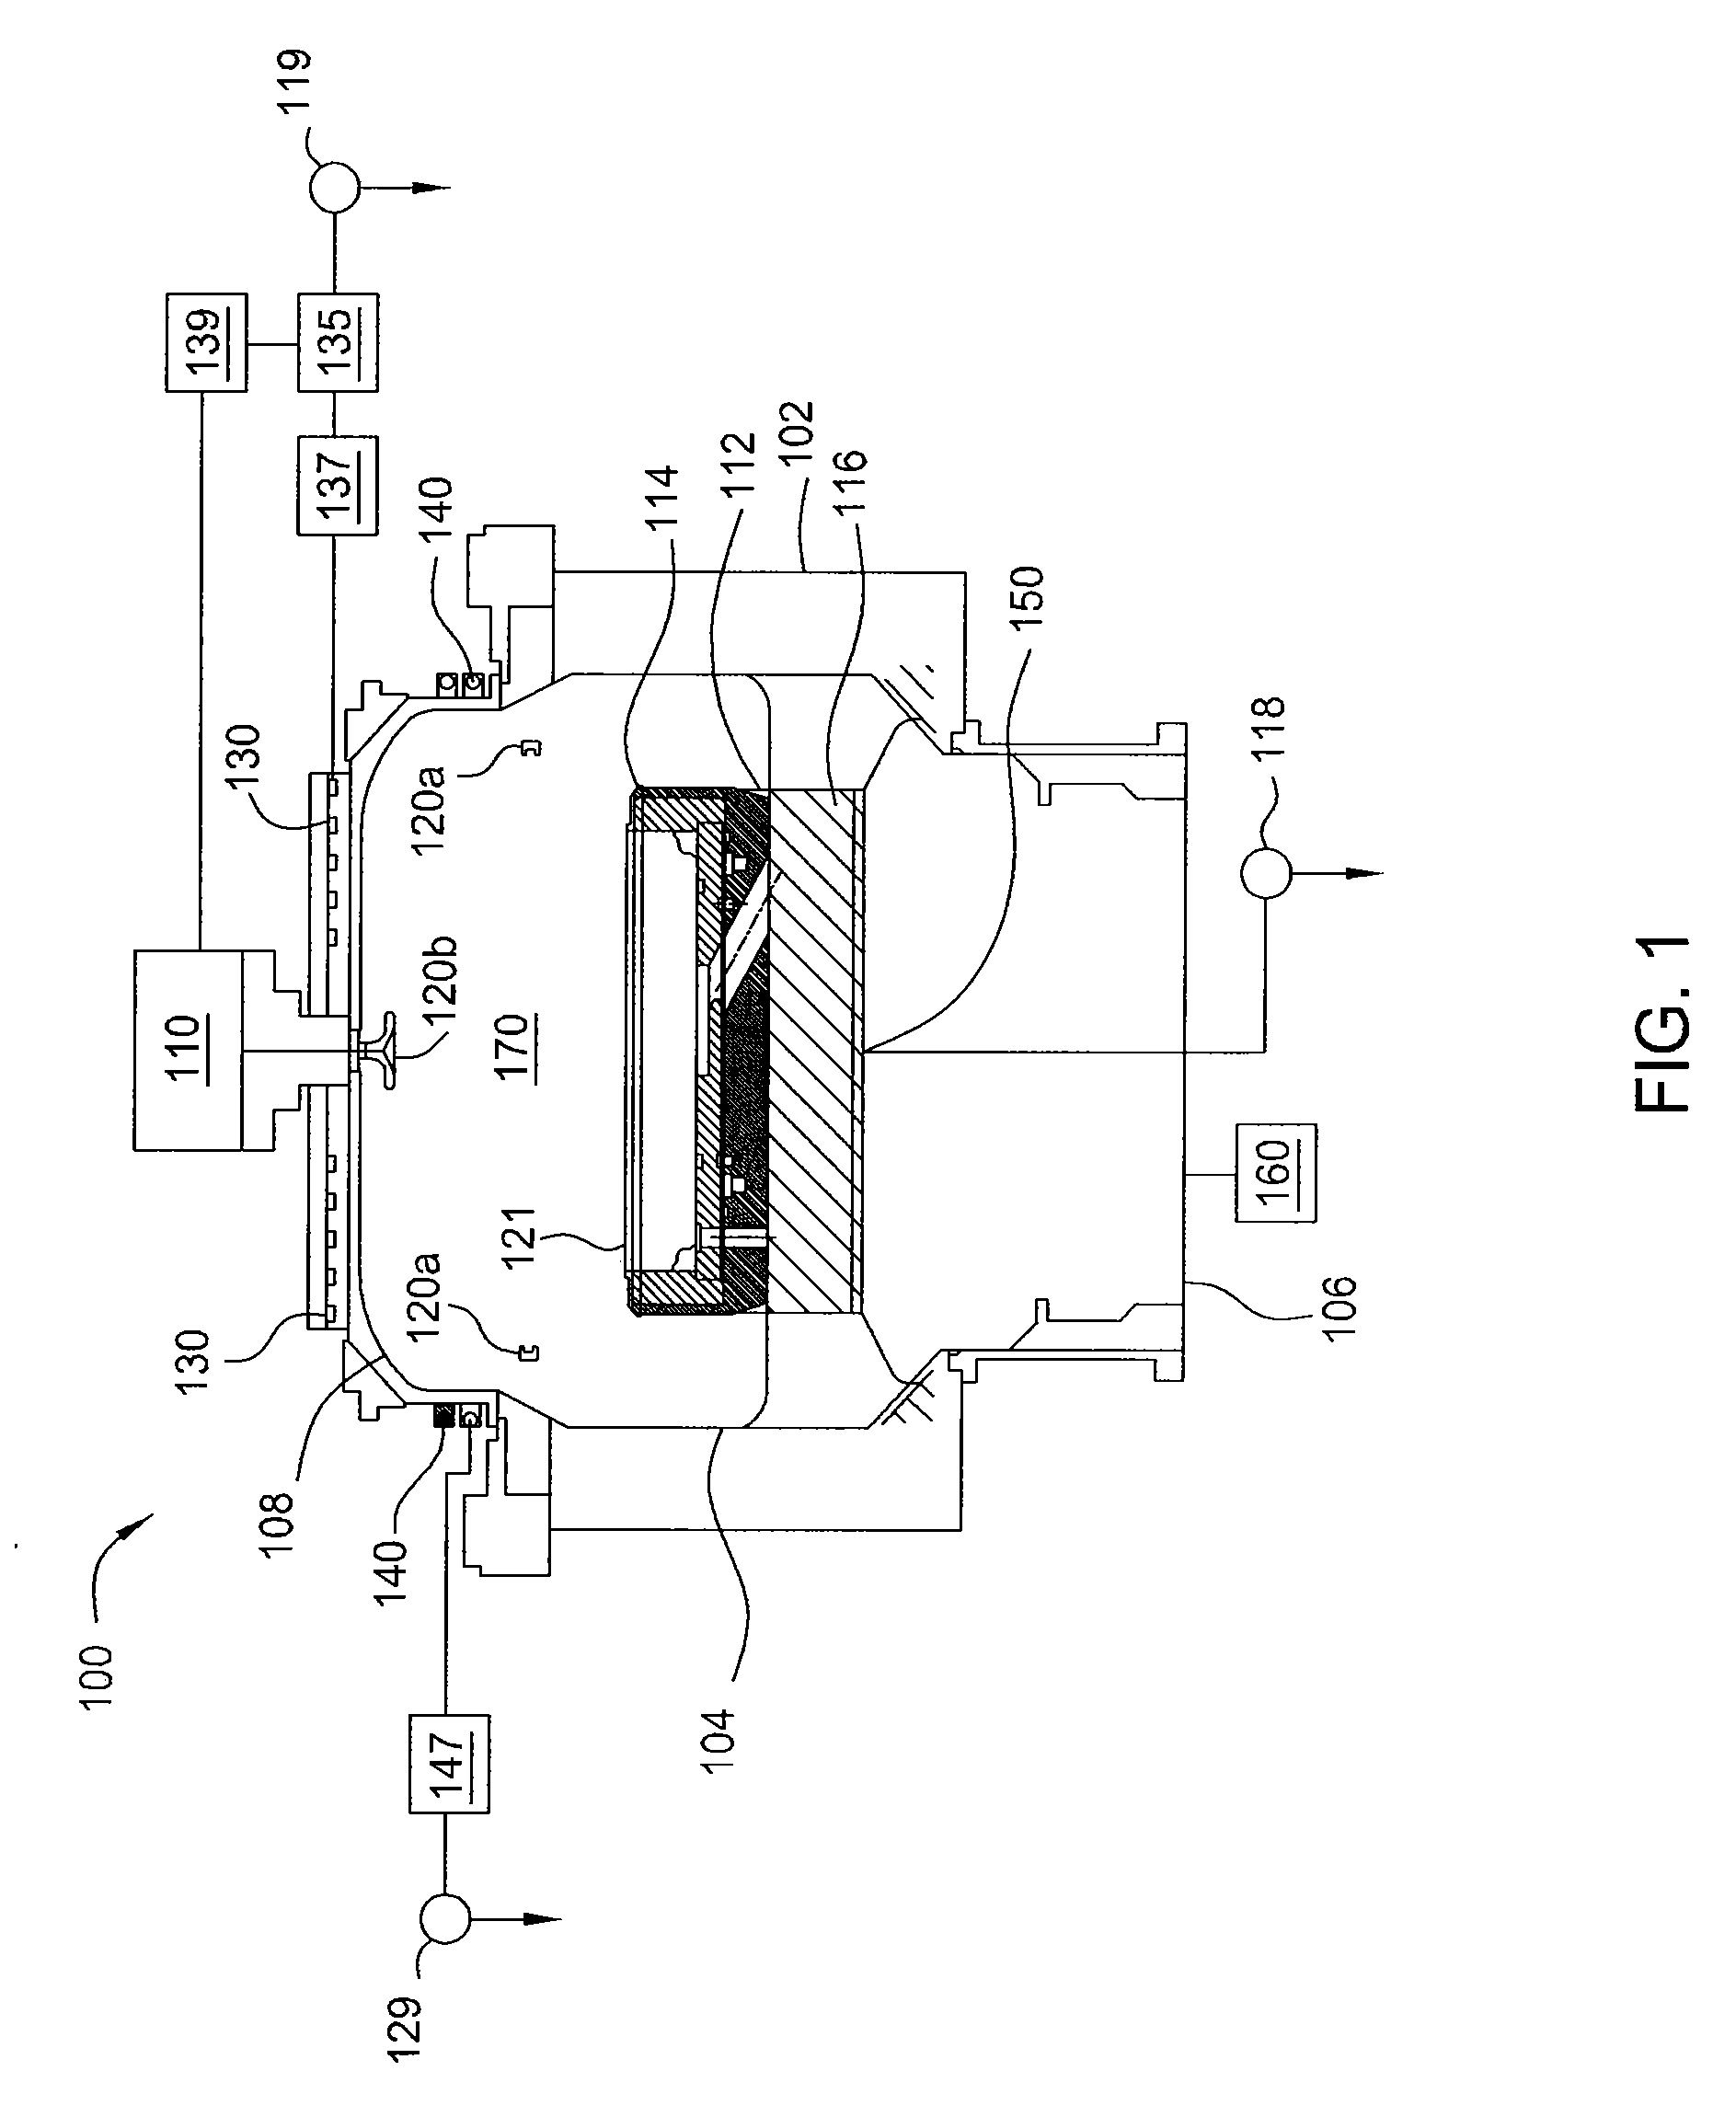 Plasma source for chamber cleaning and process